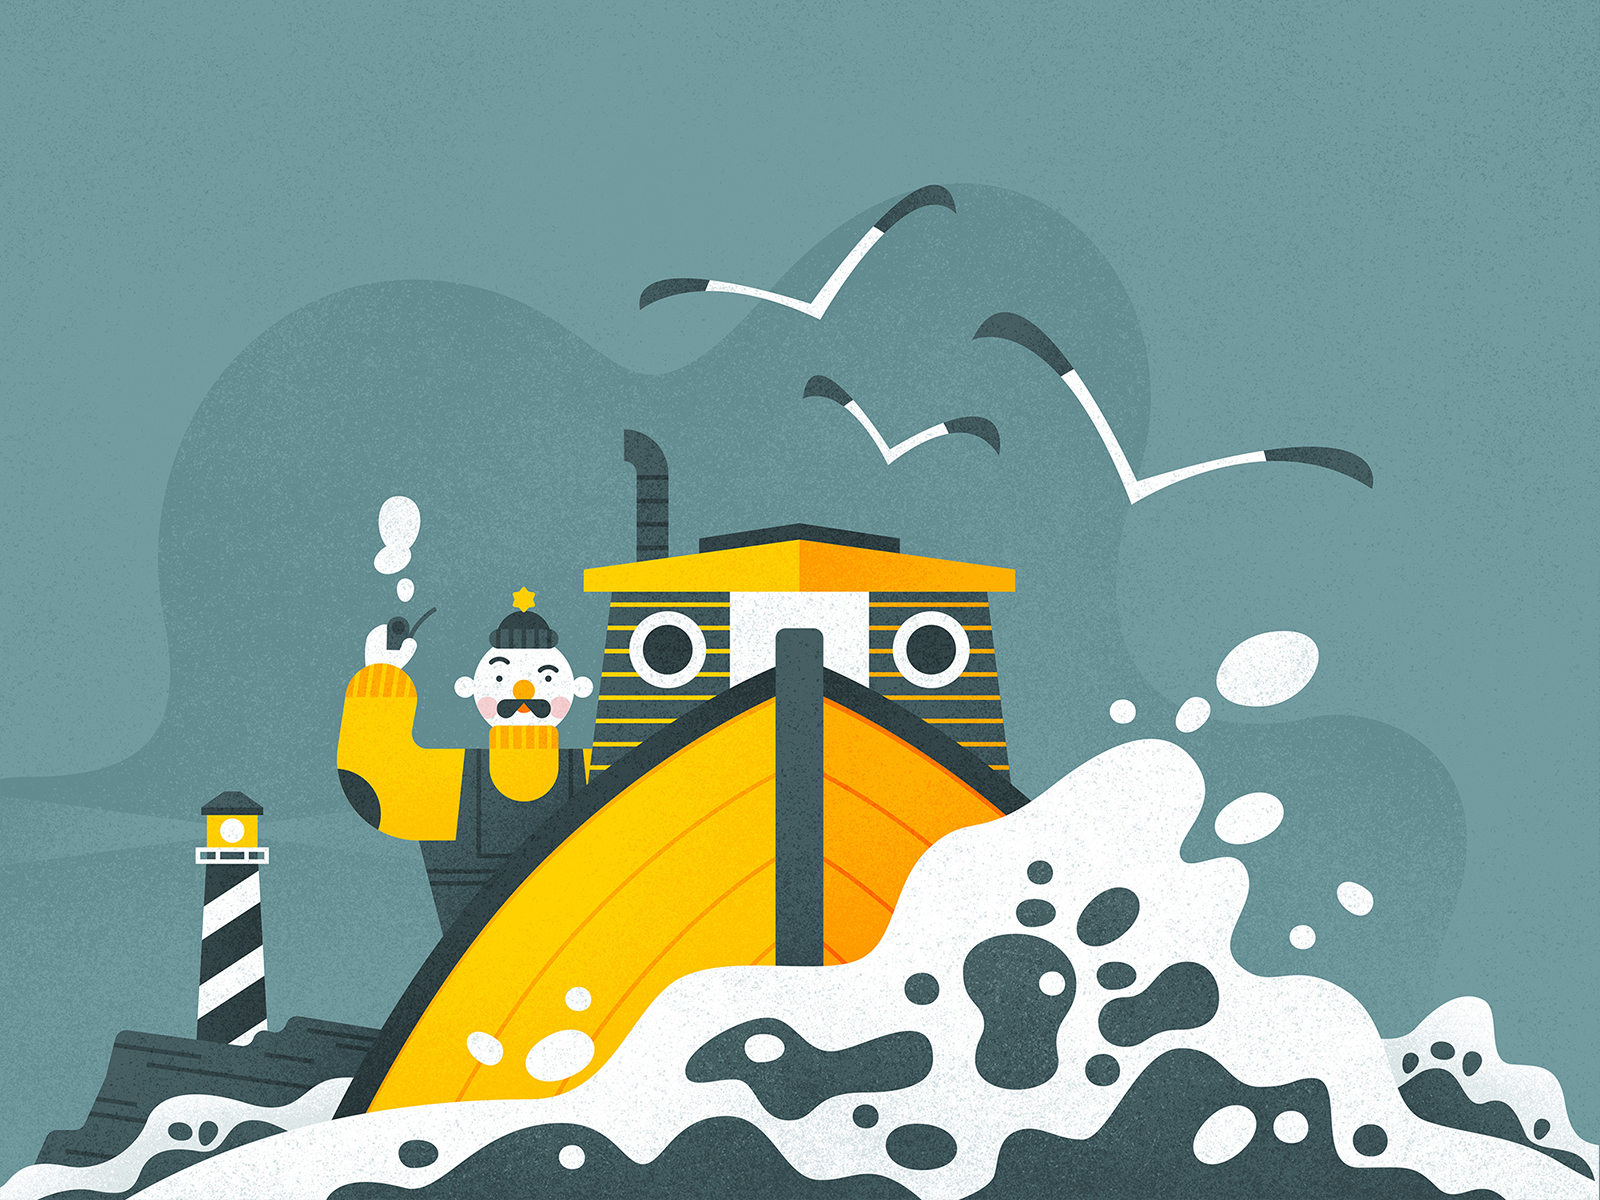 Ahoy! birds boat captain character characterdesign drawing graphic illustration lighthouse ocean pipe sailor seagulls texture vector waves